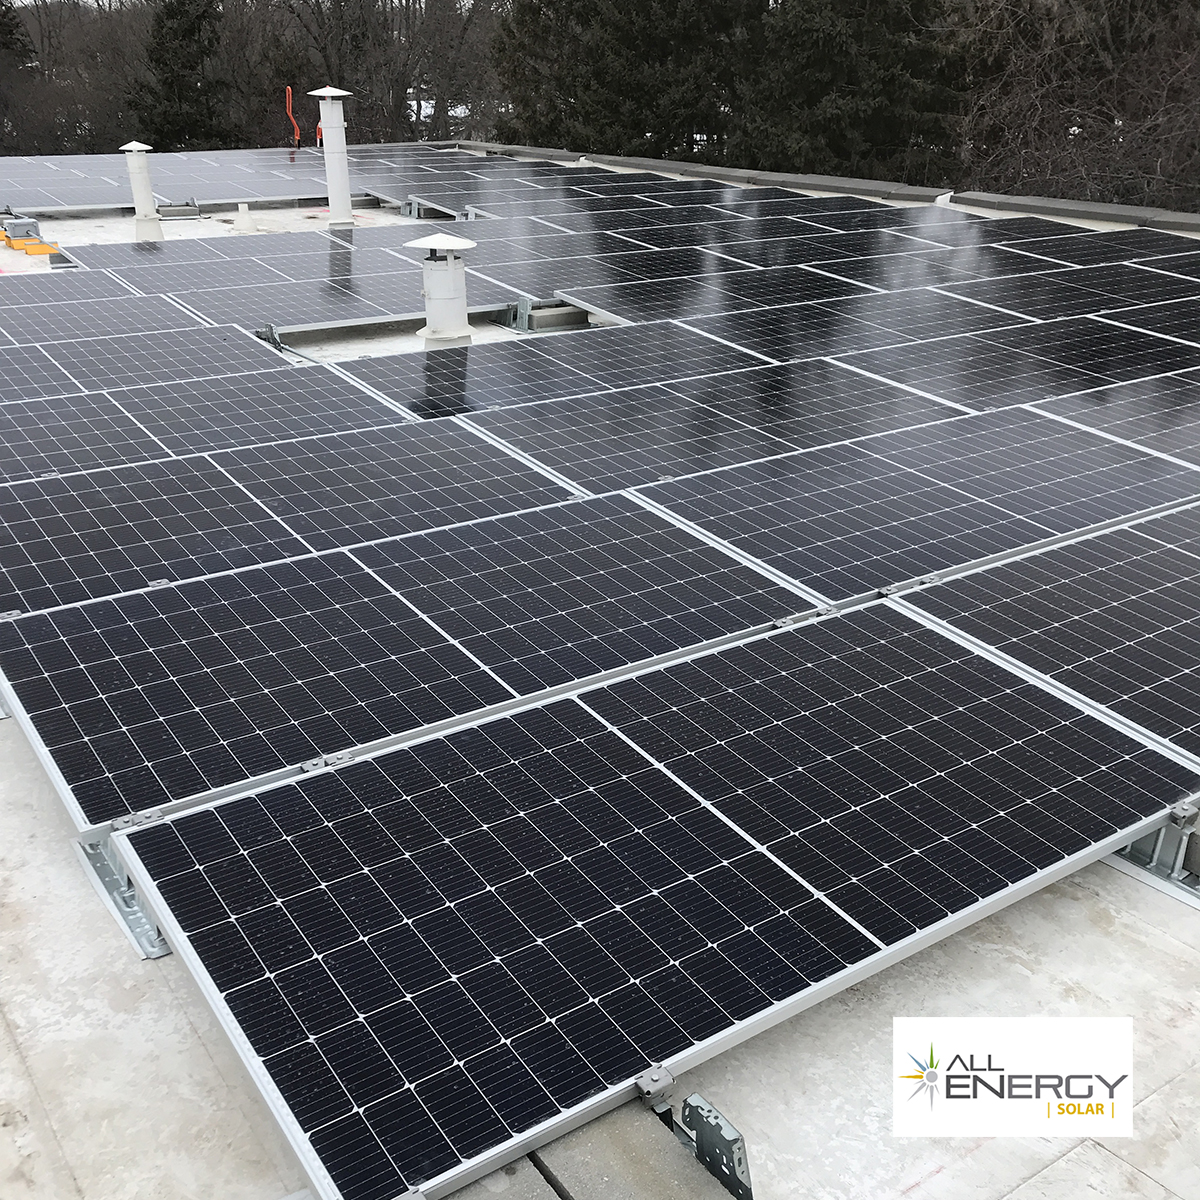 Our #Solar #InstallOfTheWeek is a commercial project in Cottage Grove, Minnesota.  Now the roof is dual-purpose - protection from the weather, as well as 28.48 kw energy generation from the sun! Learn more about Solar for Business: https://t.co/pt4tP2fVOb https://t.co/pwGC09GqXT